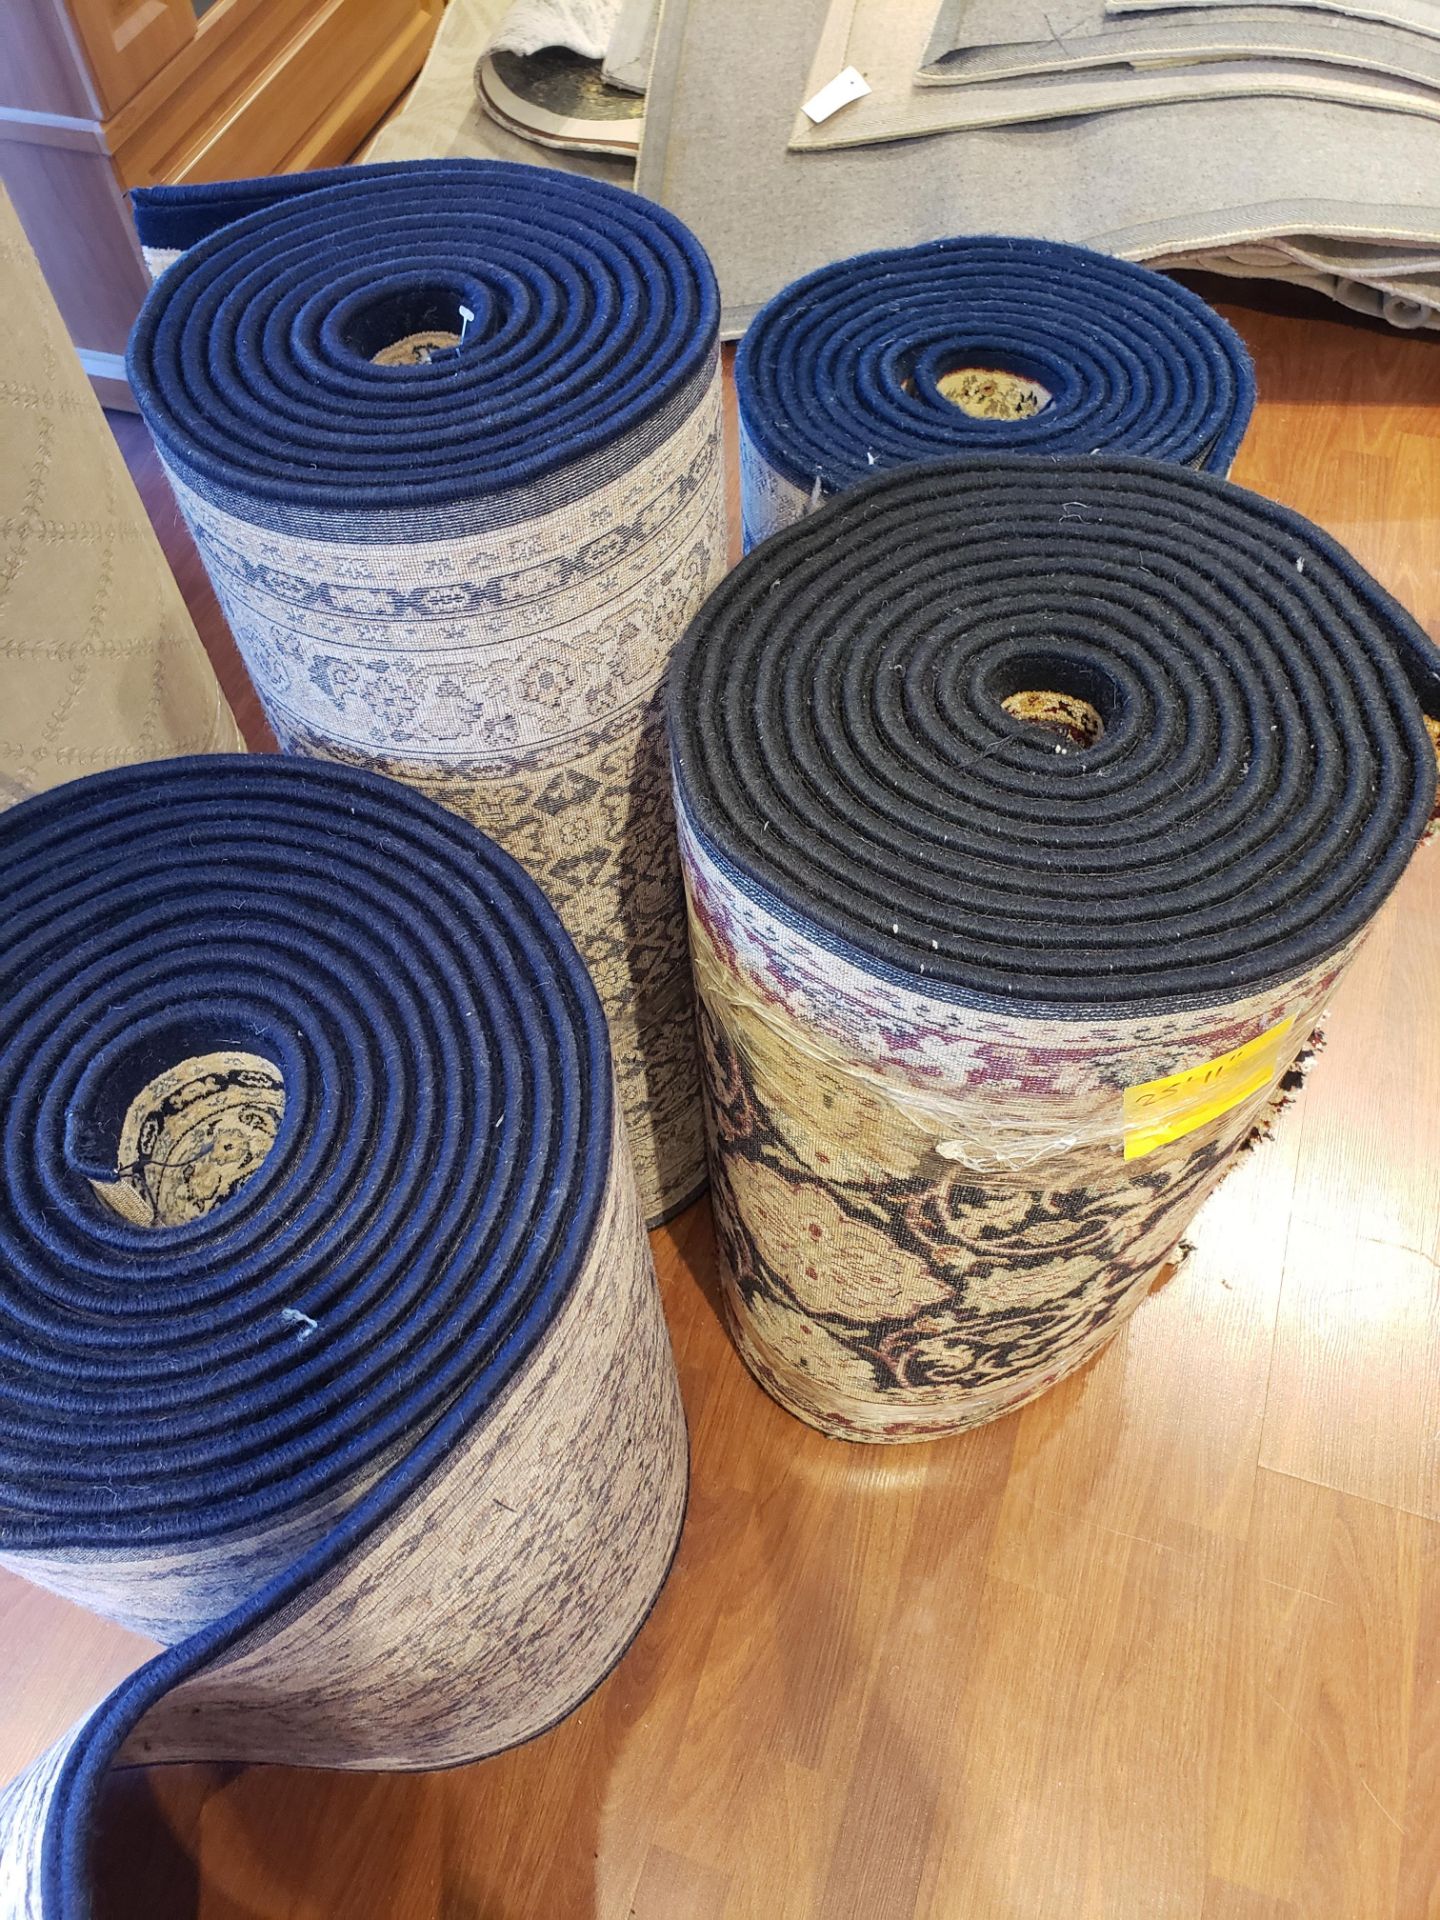 LOT OF ASST. CARPETS, RUNNERS, ETC. - Image 4 of 4